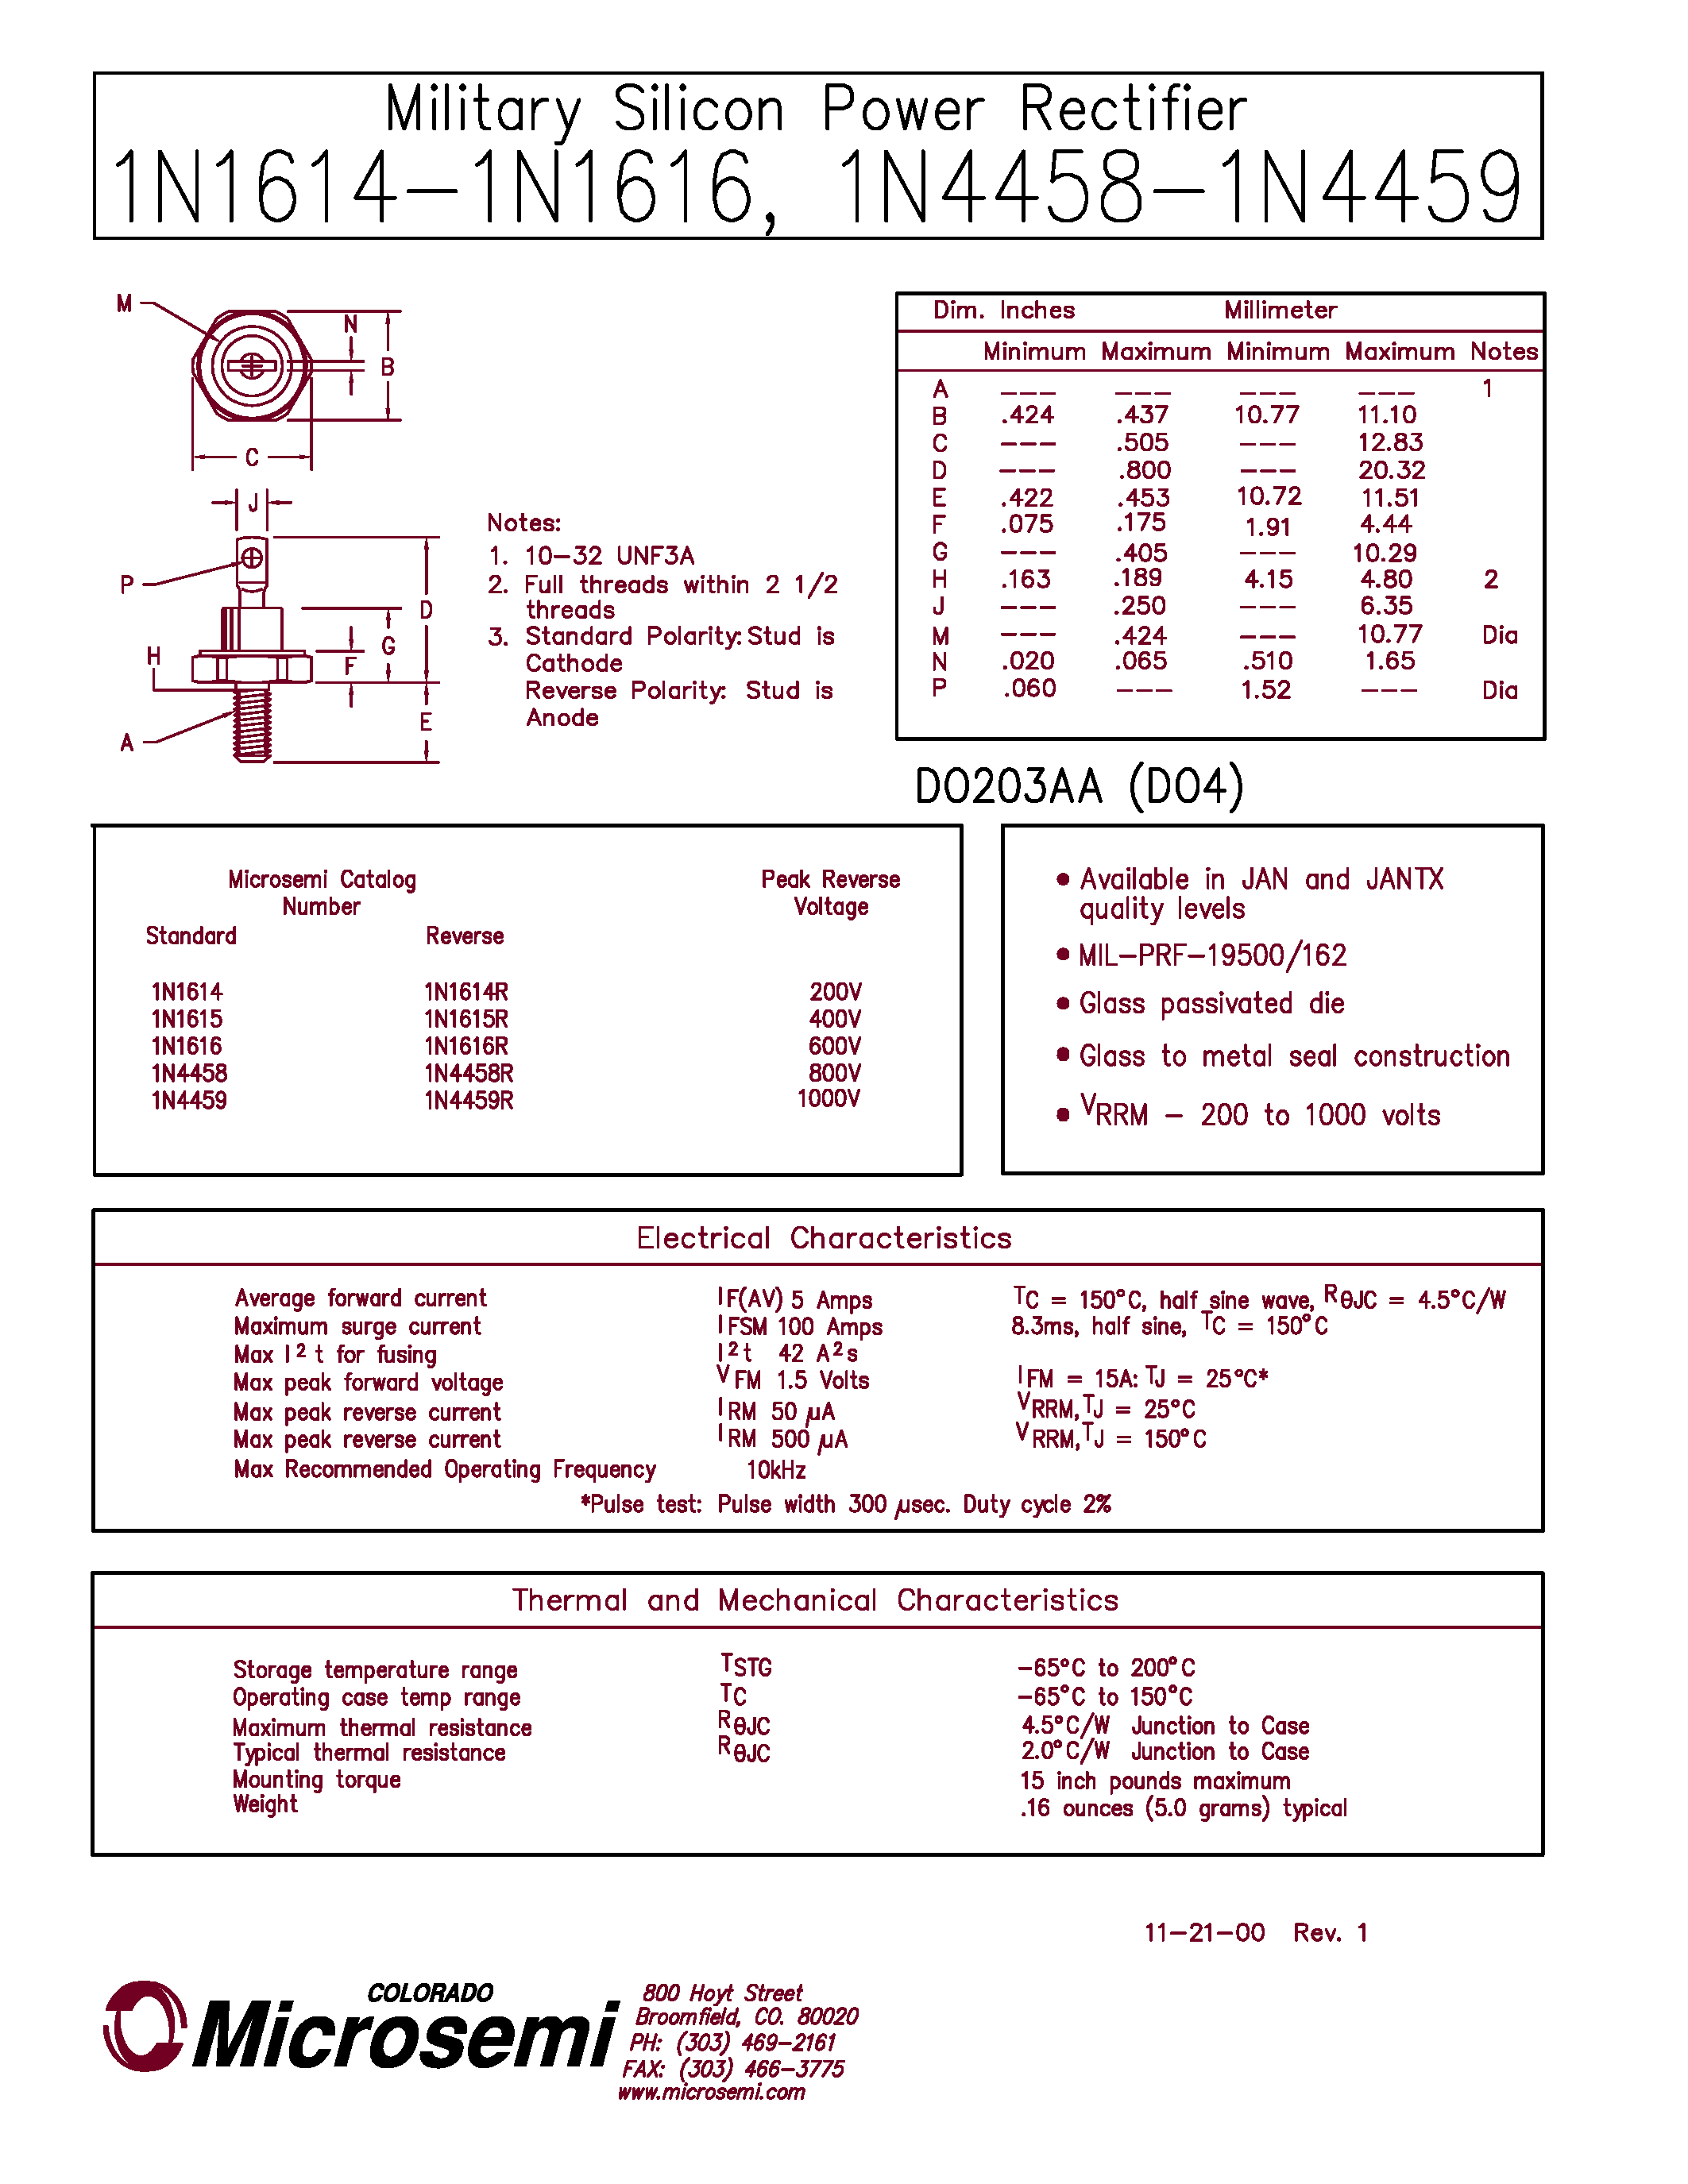 Datasheet 1N1615 - Military Silicon Power Rectifier page 1